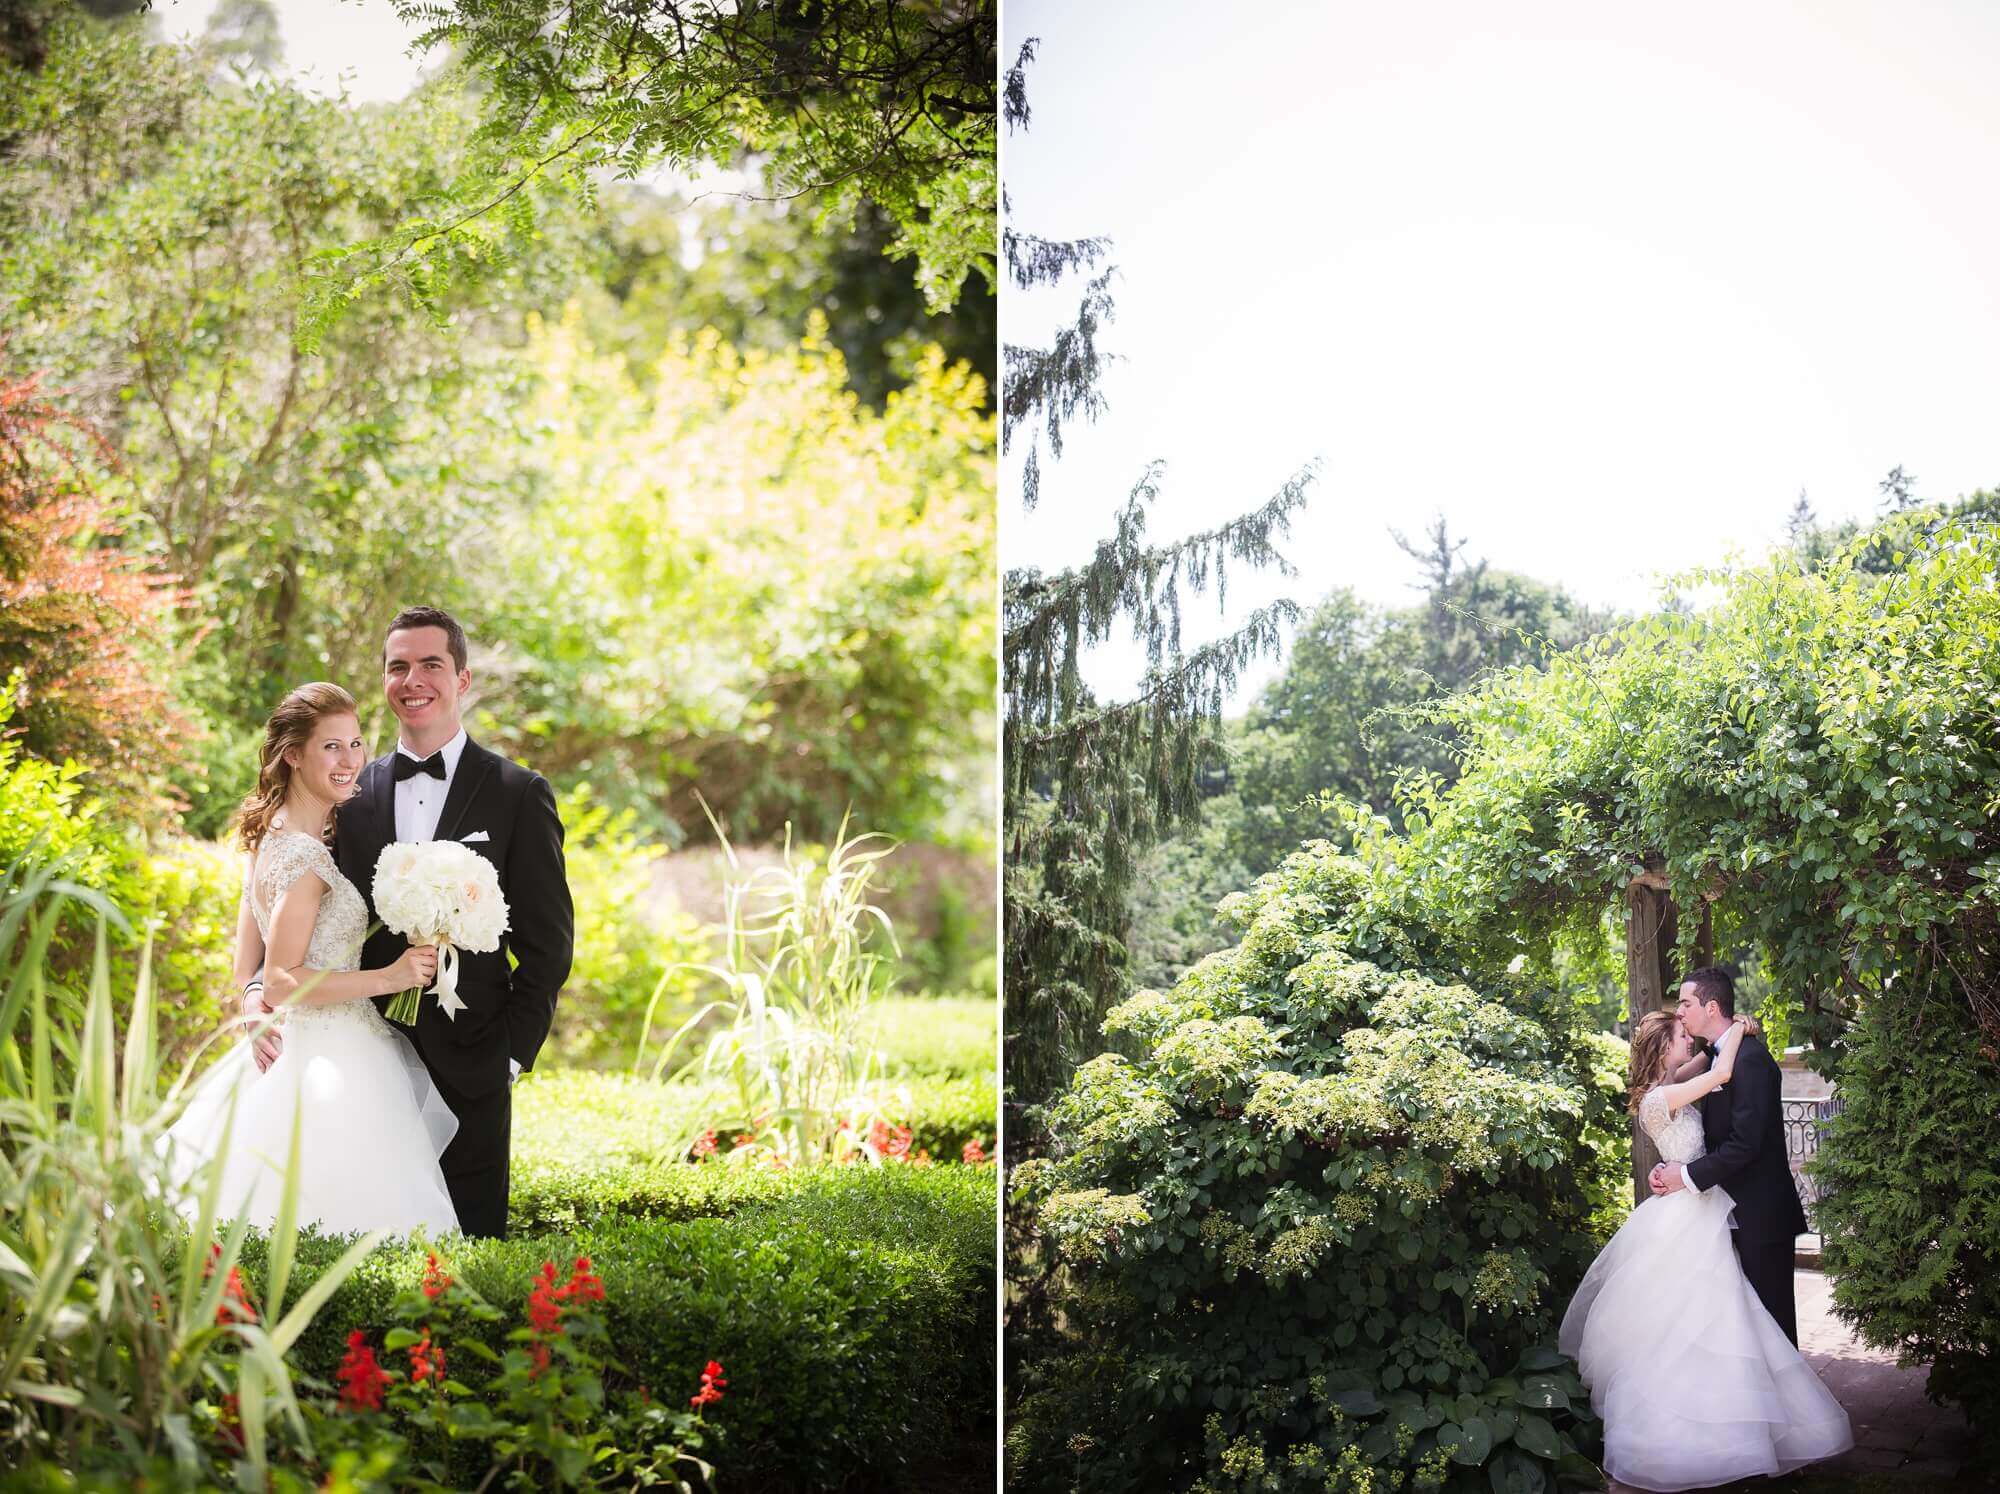 Portraits of the bride and groom at Alexander Muir Gardens in Toronto